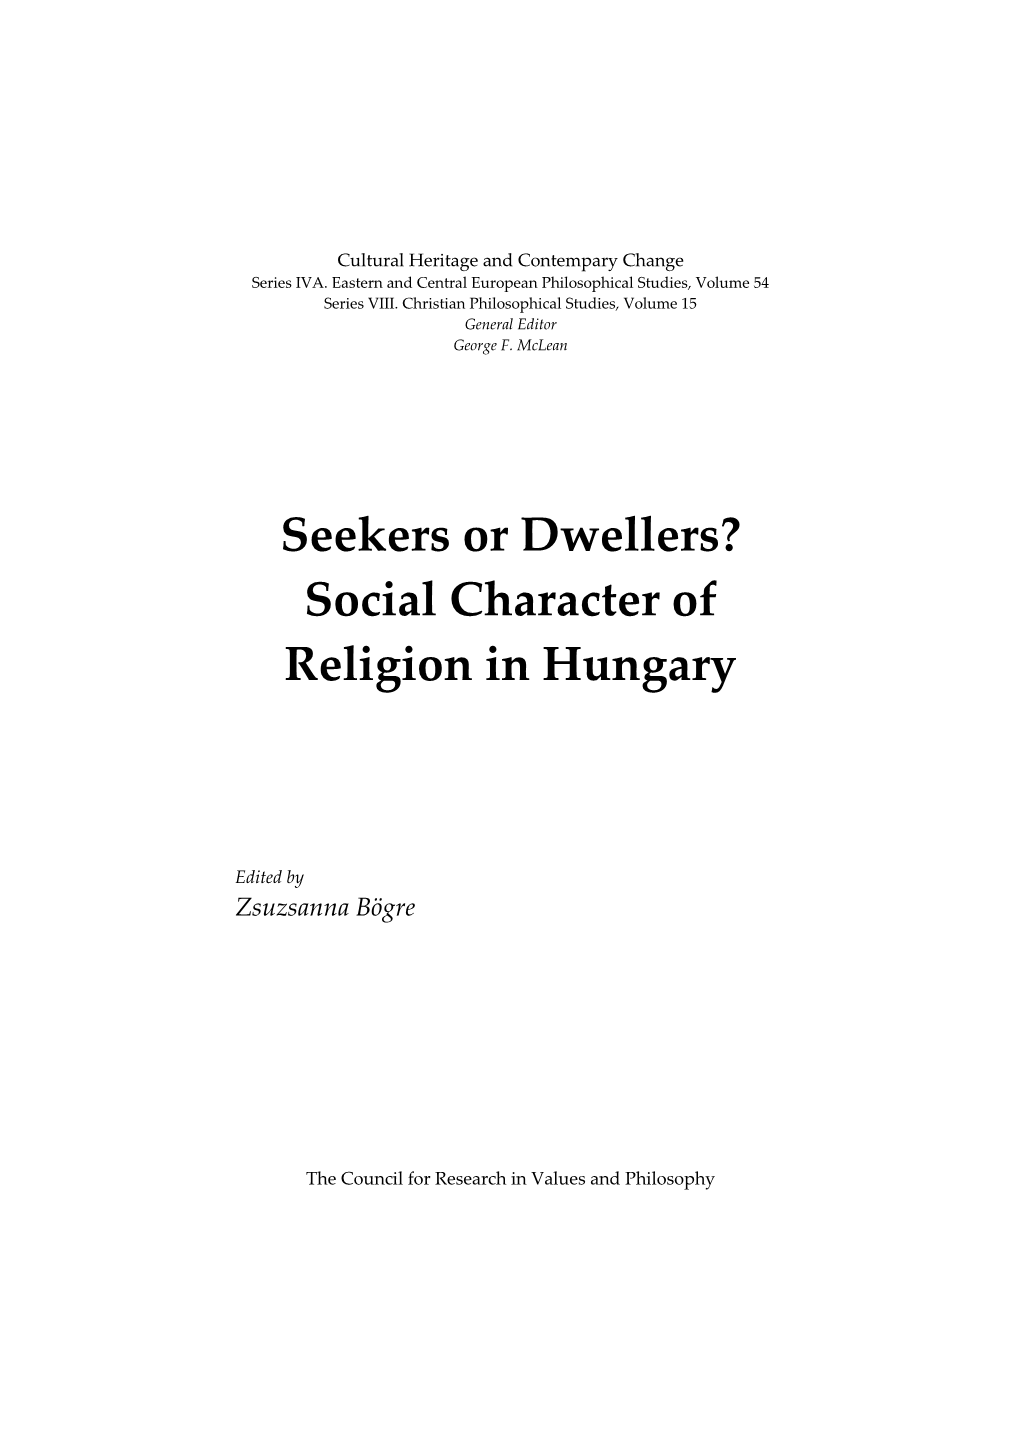 Seekers Or Dweller: the Social Character of Religion in Hungary: Hungarian Philosophical Studies, II